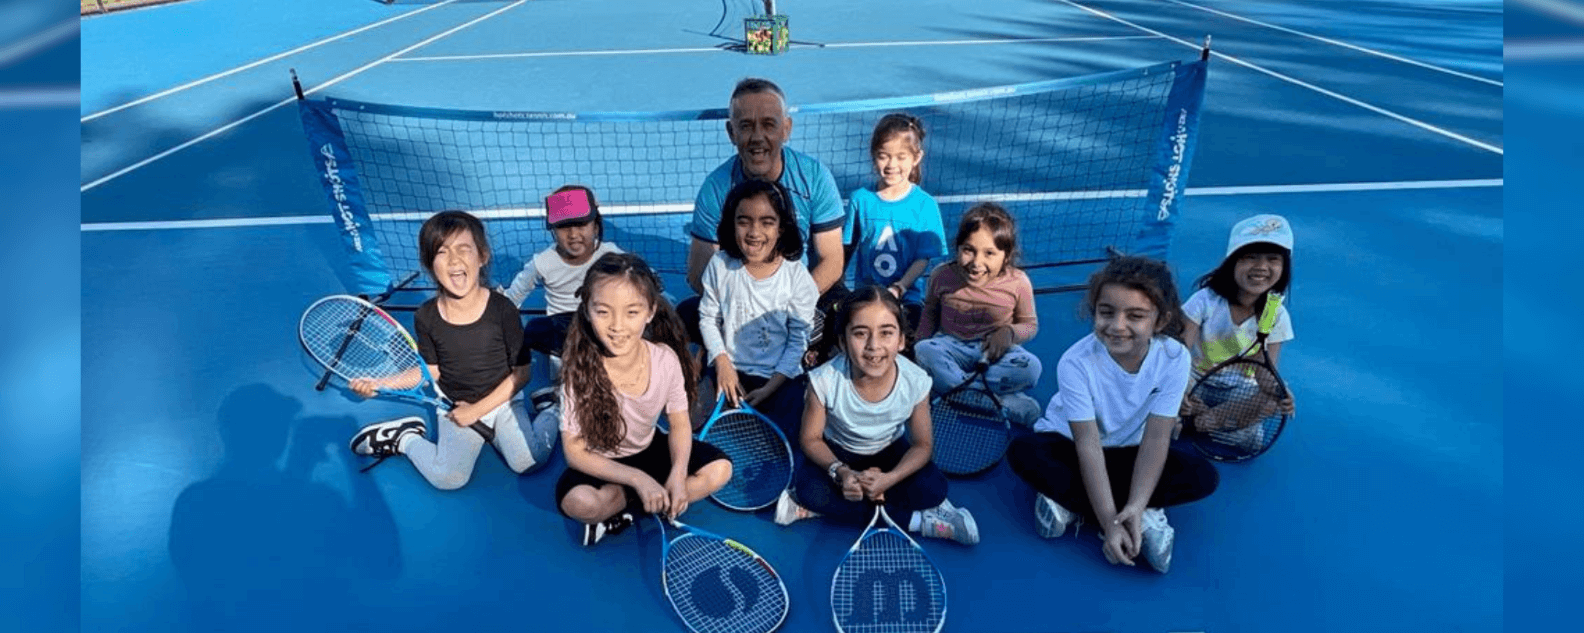 Tennis World Holiday Camps